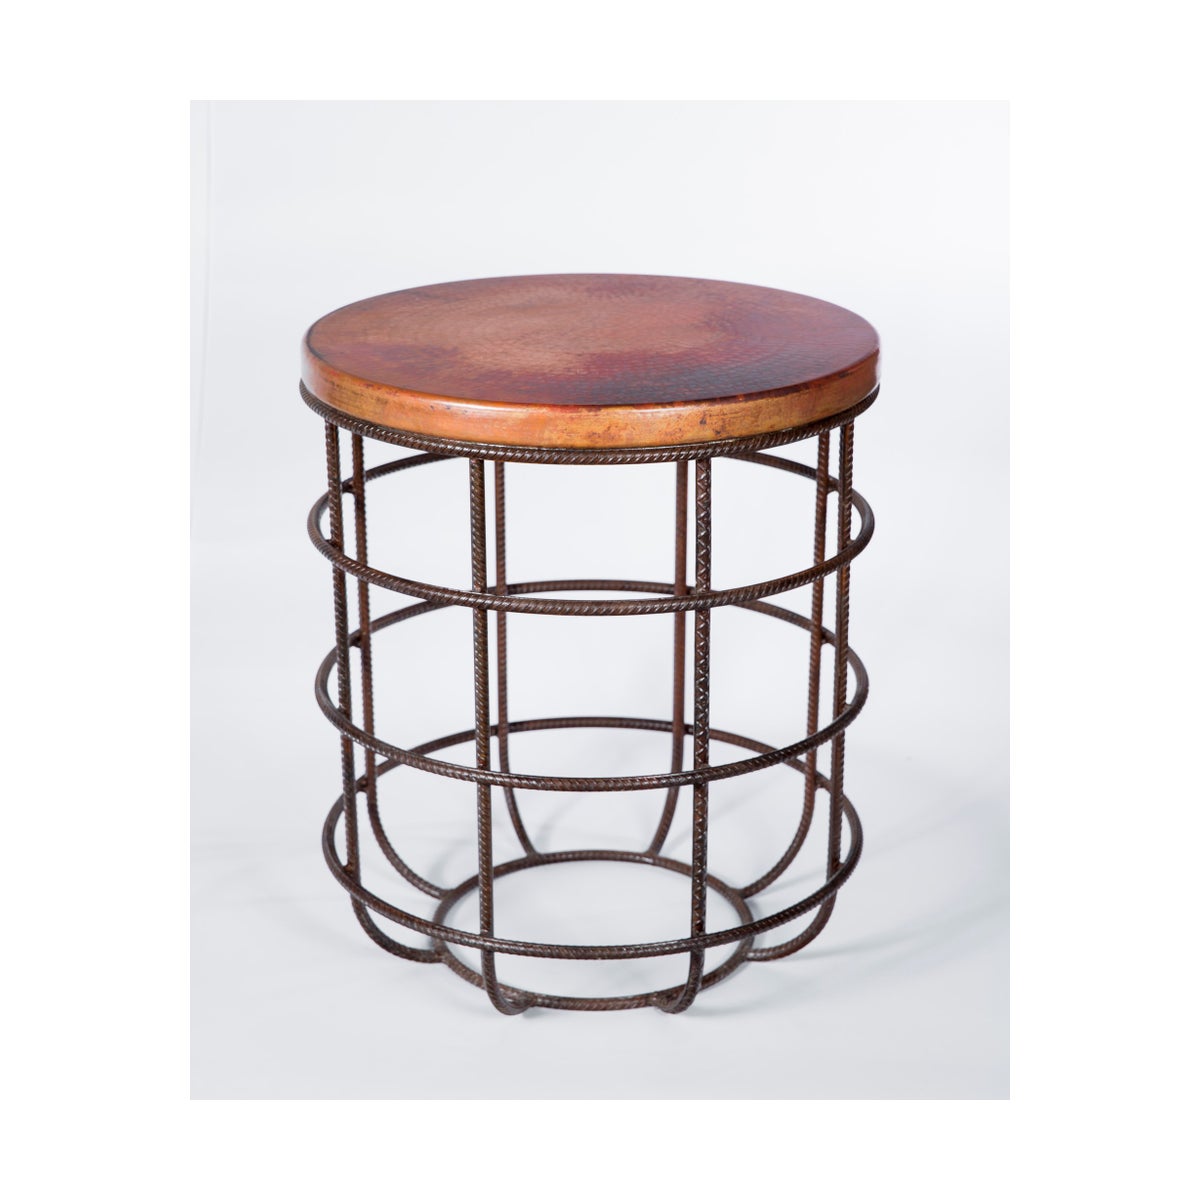 Axel Side Table in Rebar with Round Hammered Copper Top